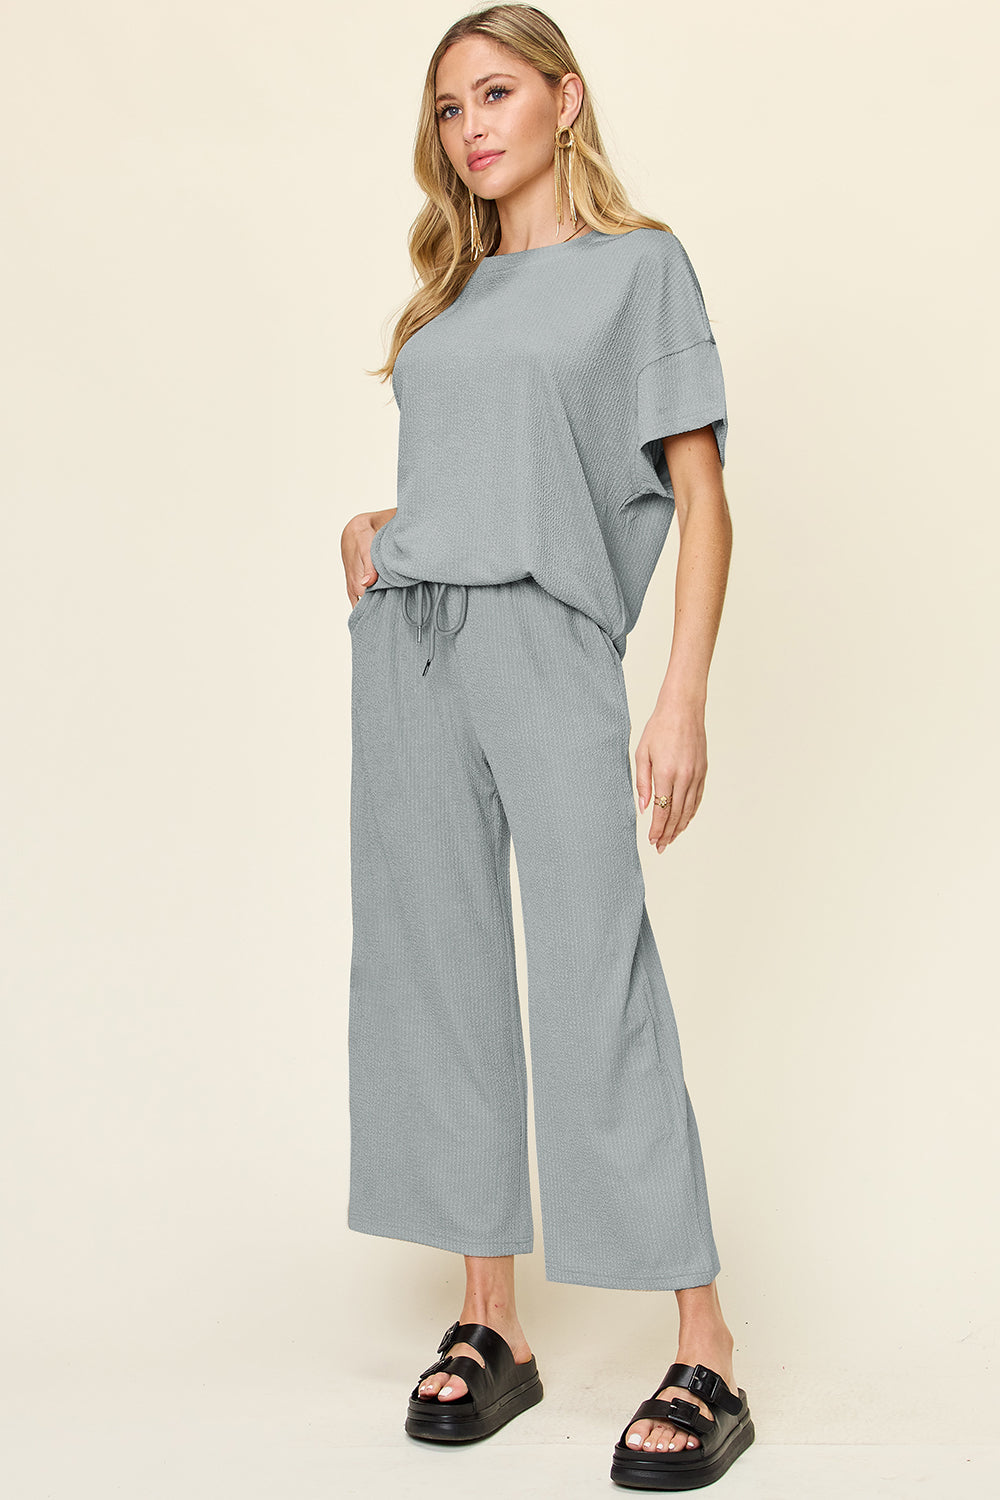 Textured Knit Top and Wide Leg Pant Set Cloudy Blue